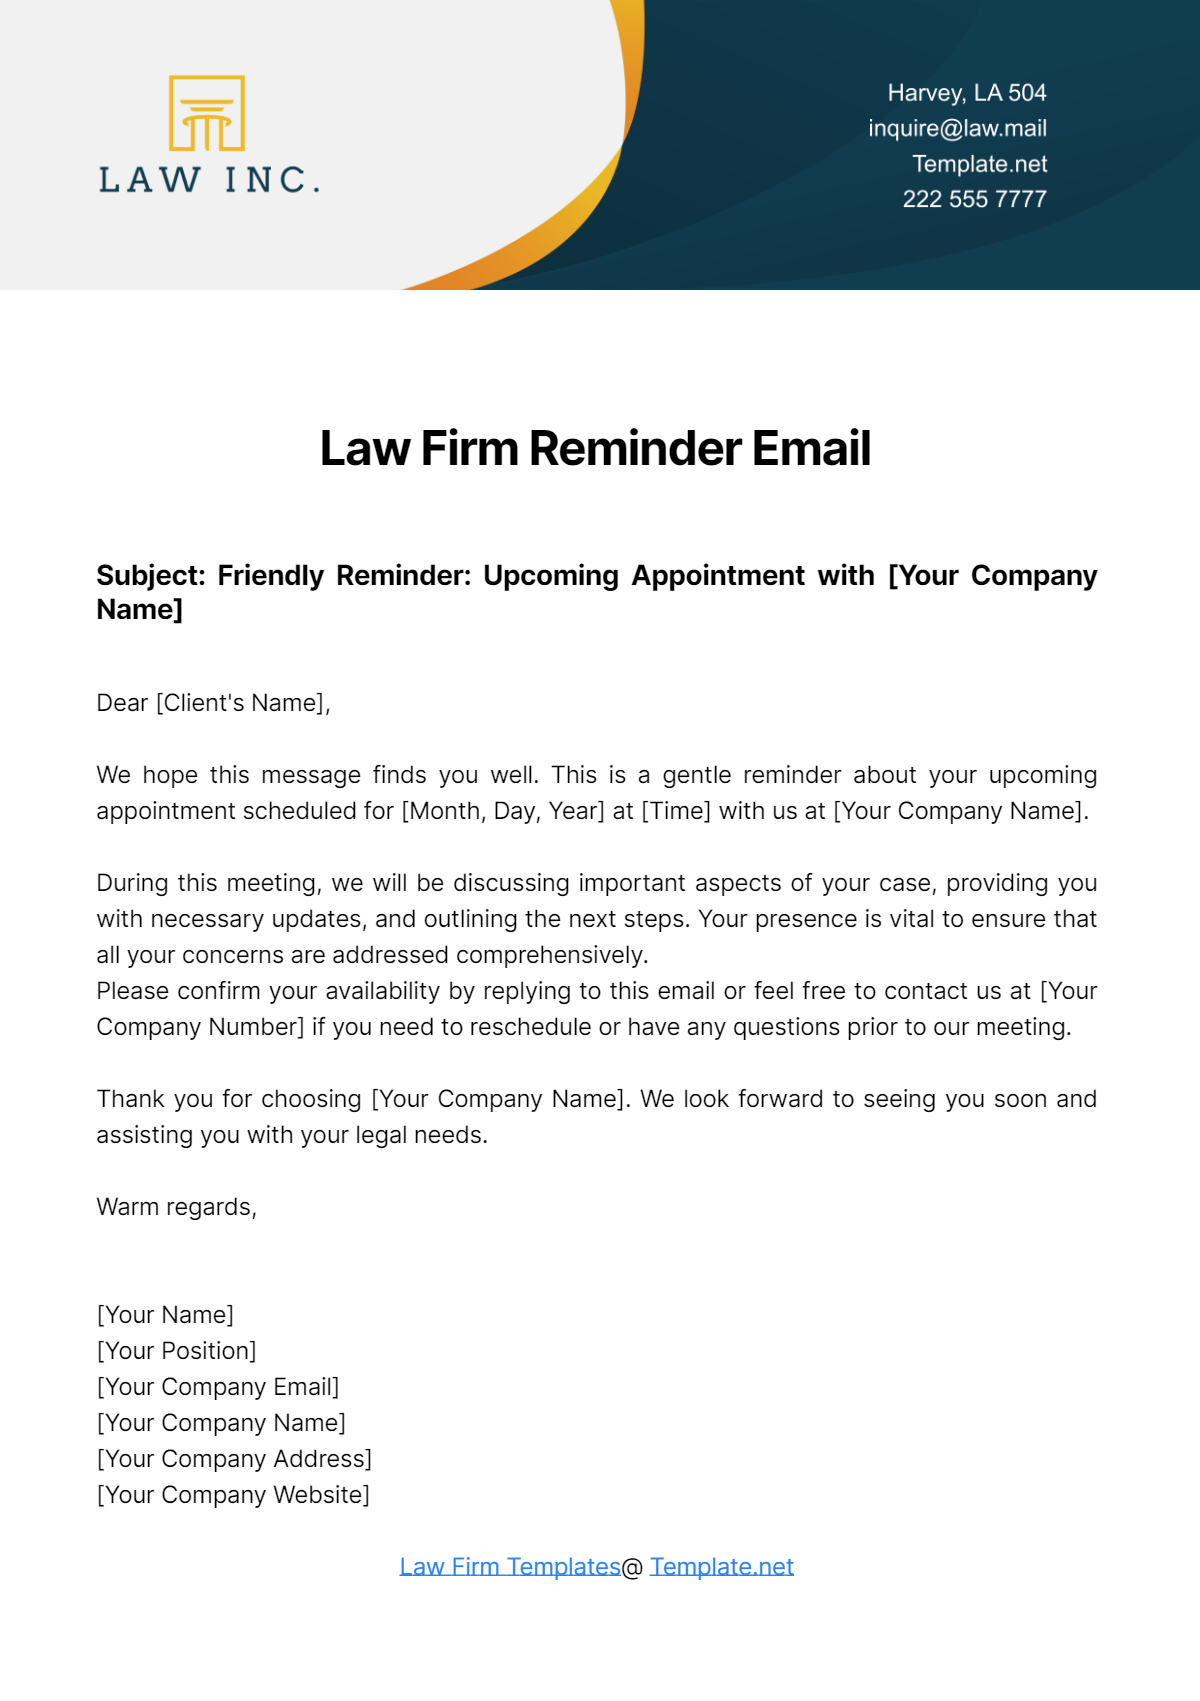 Law Firm Reminder Email Template